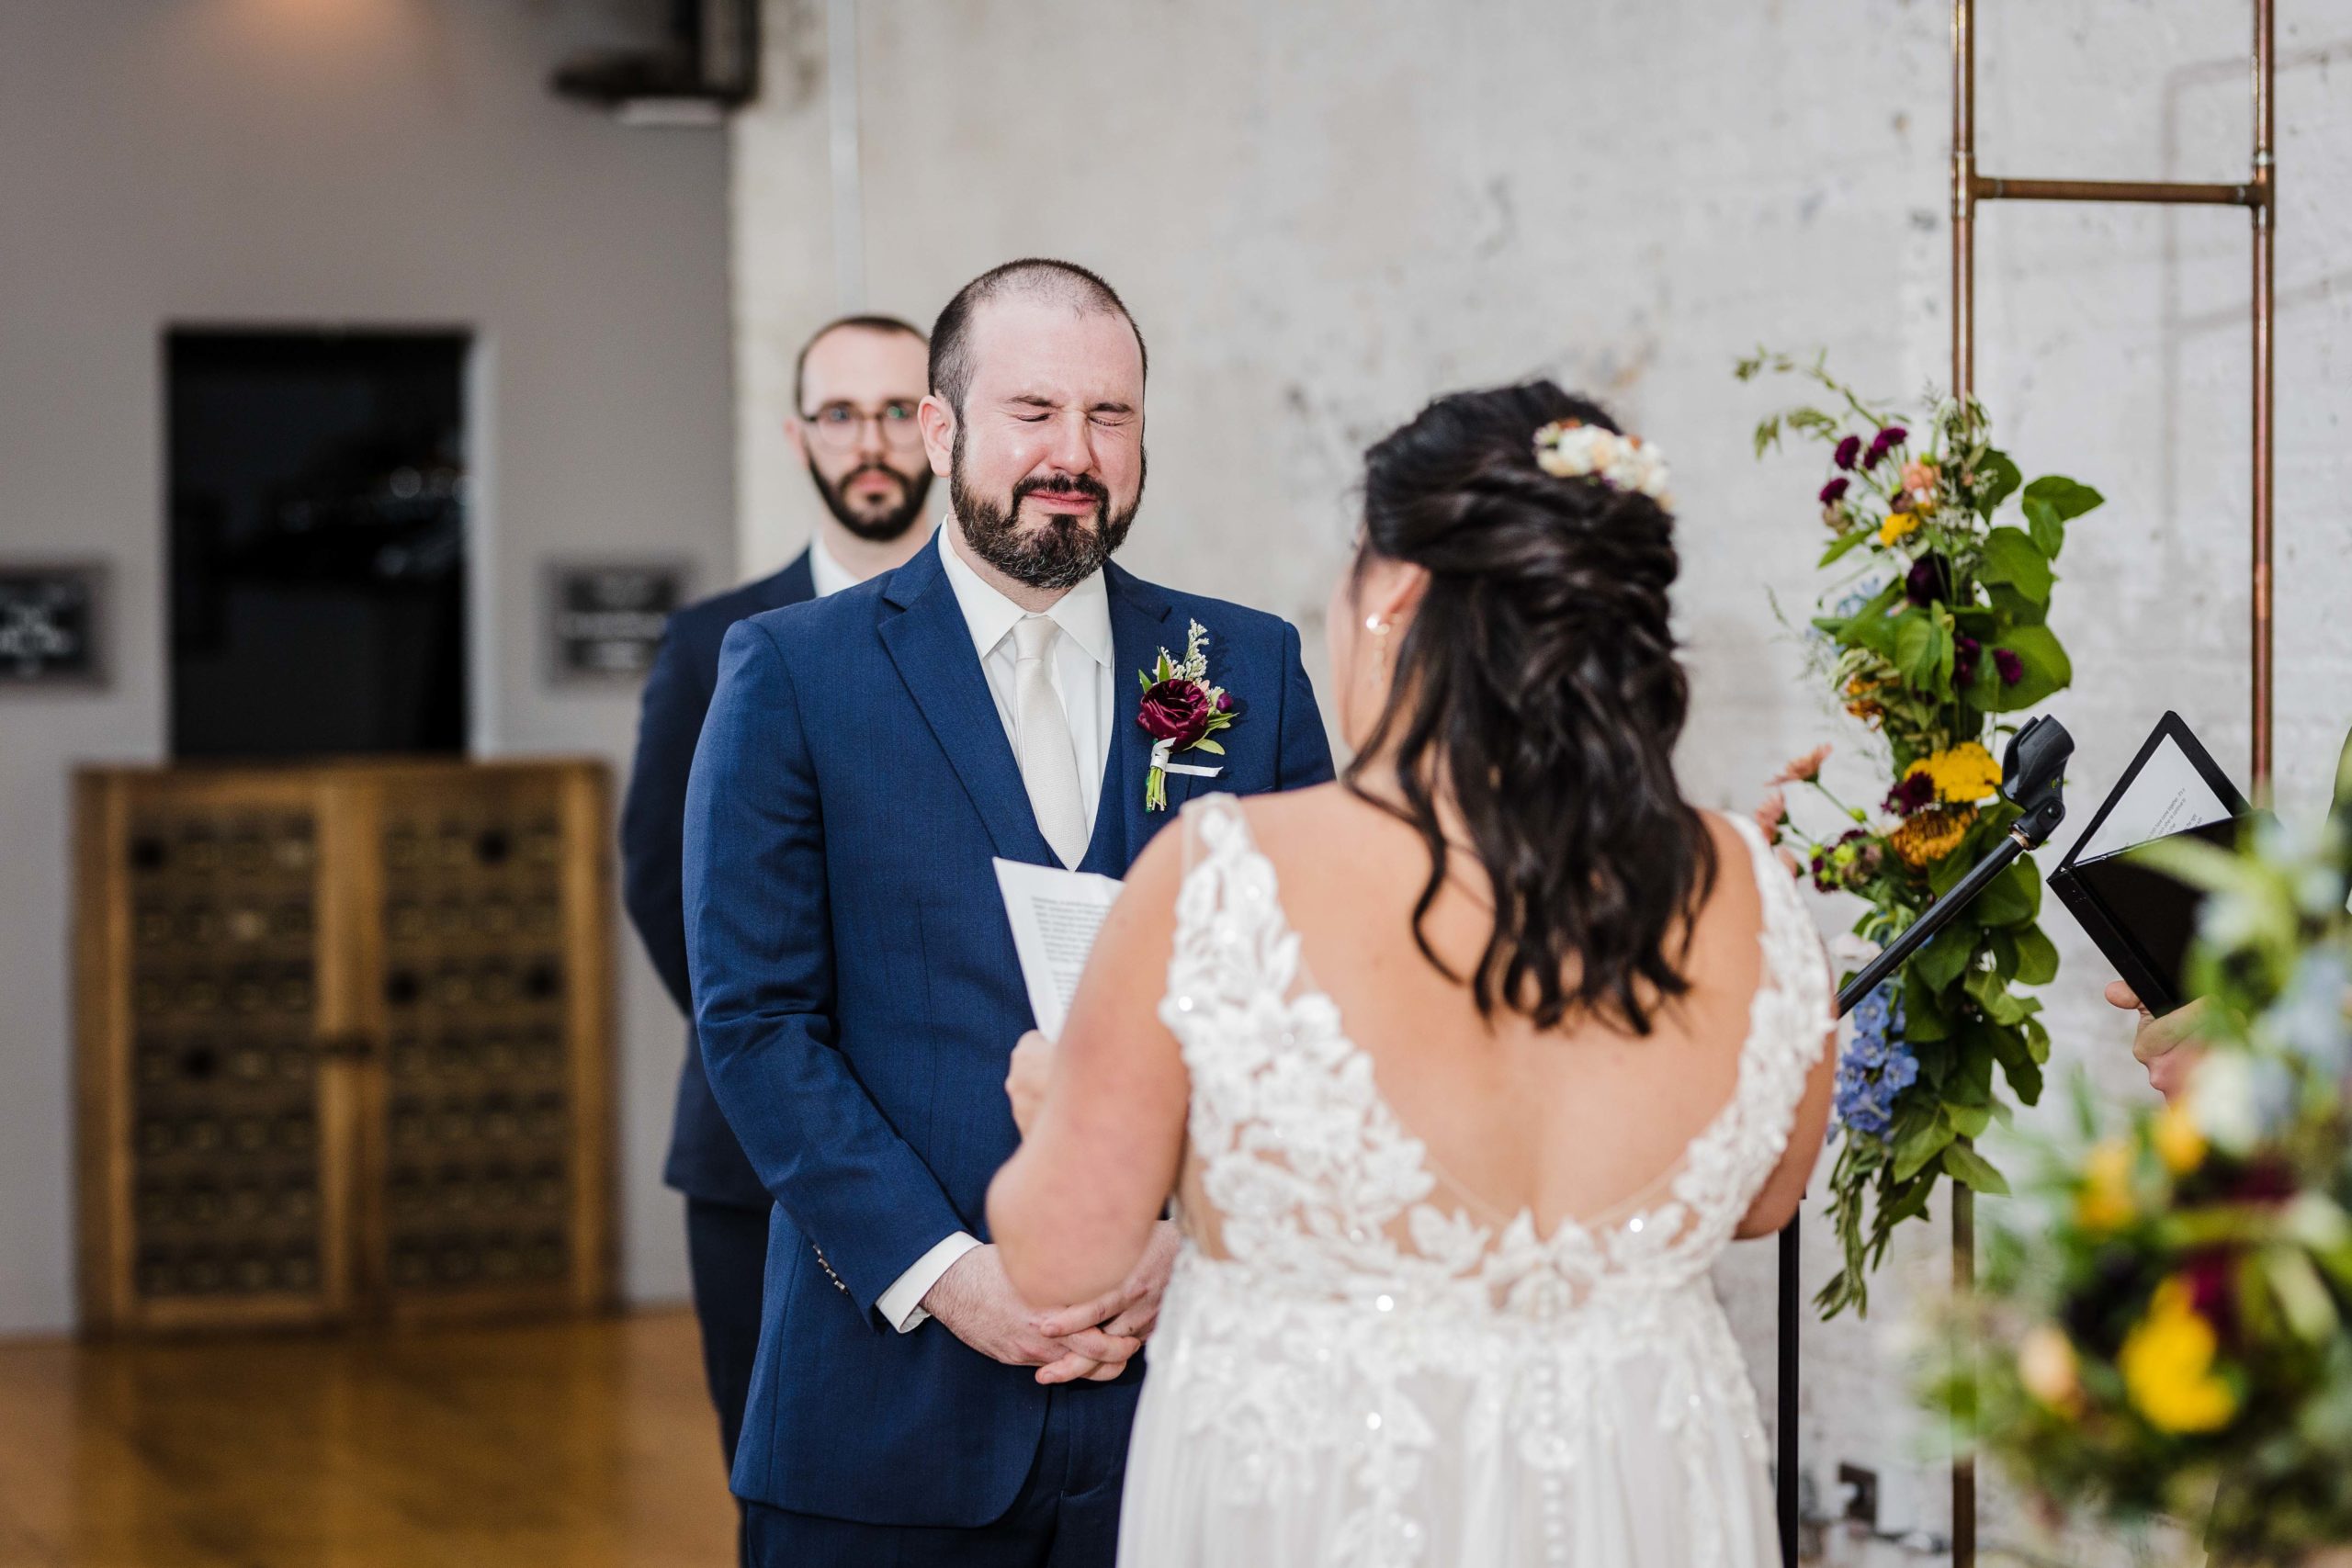 Wedding at The Joinery